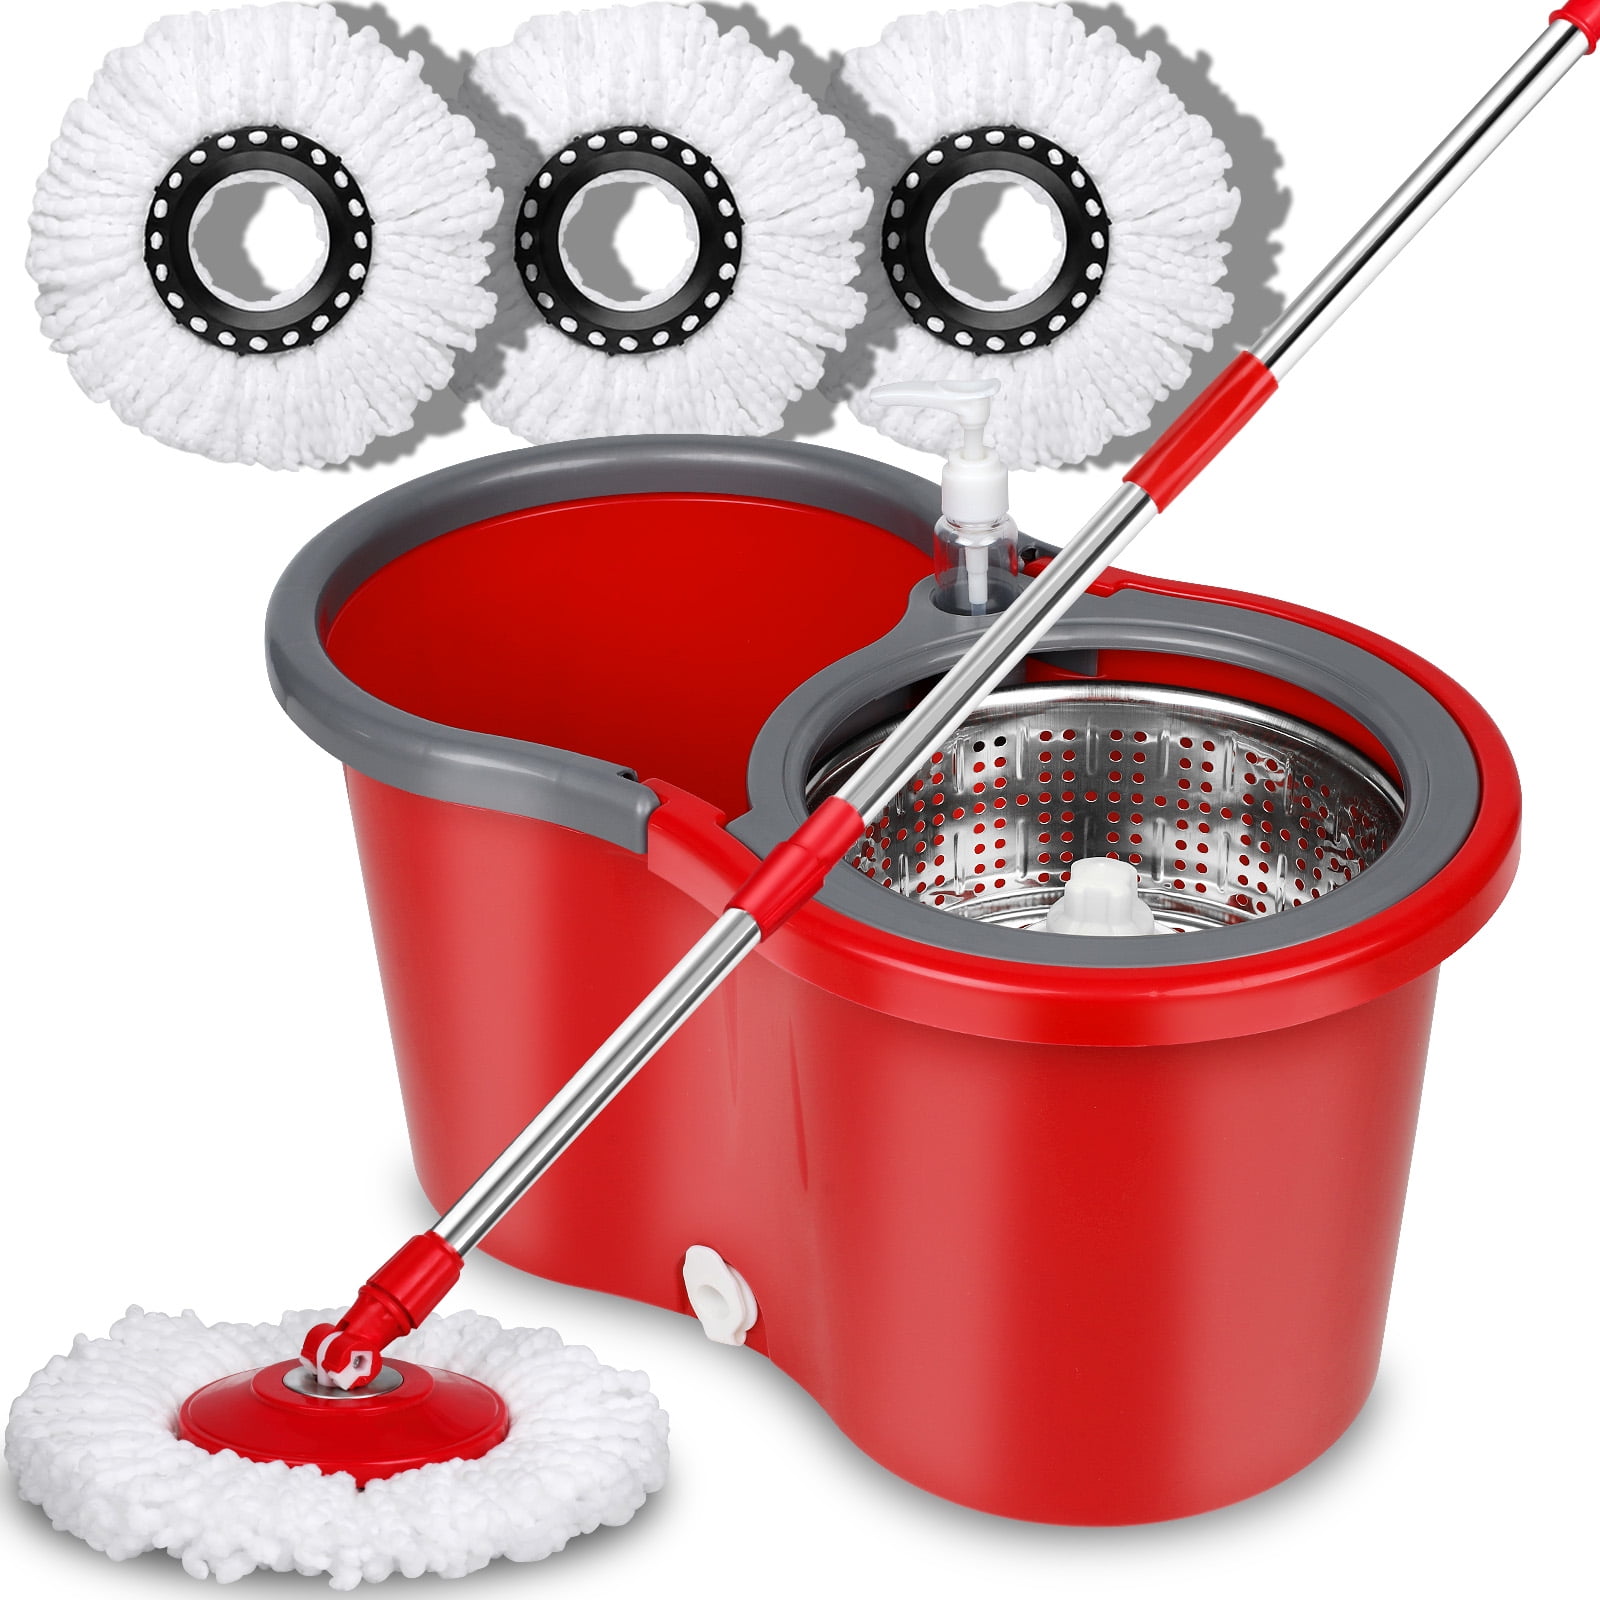 Spin mop. Mop and Bucket.